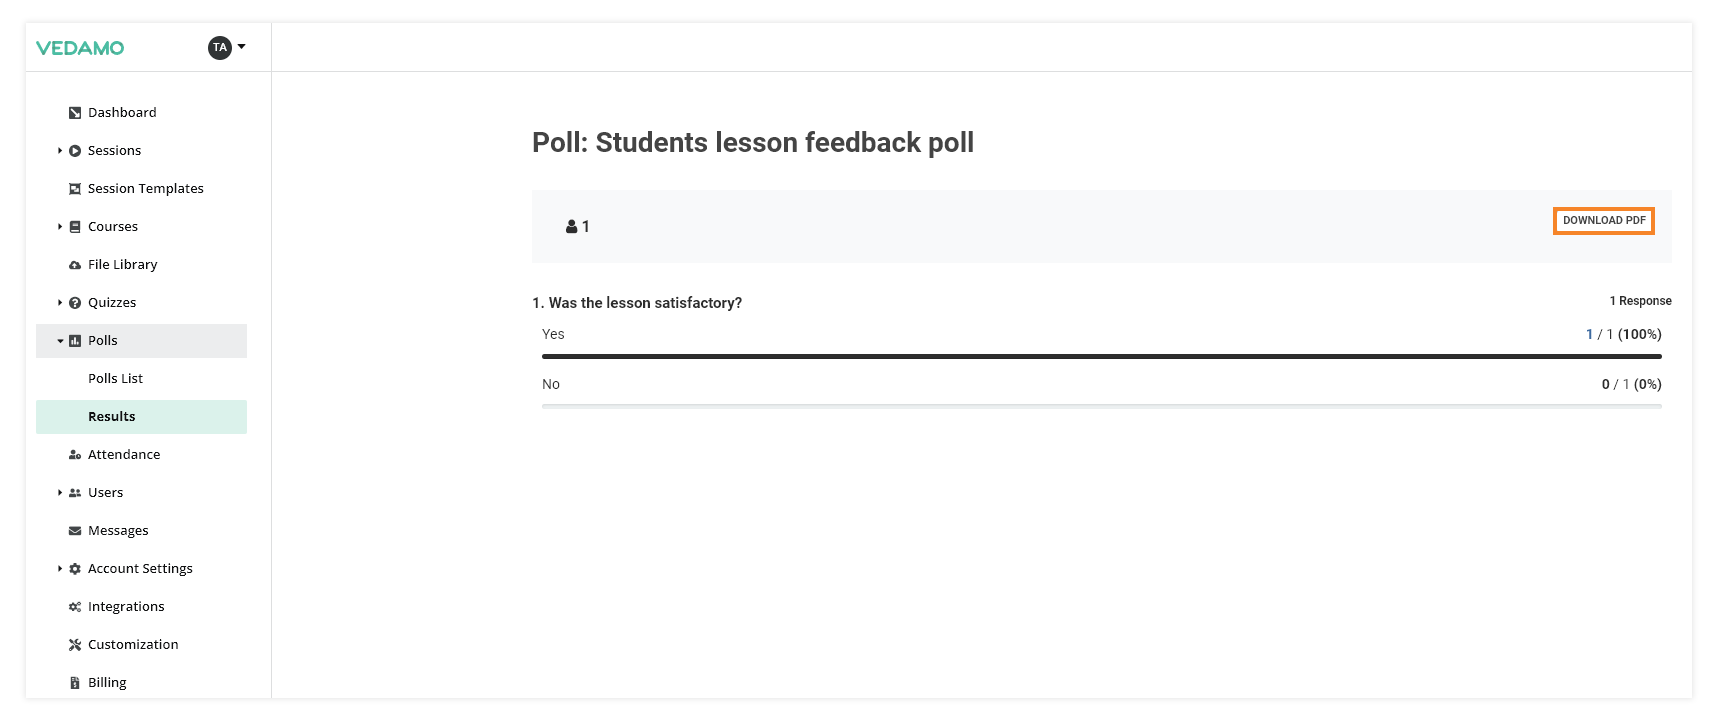 Polls in the Virtual Classroom and the LMS: Download as PDF option